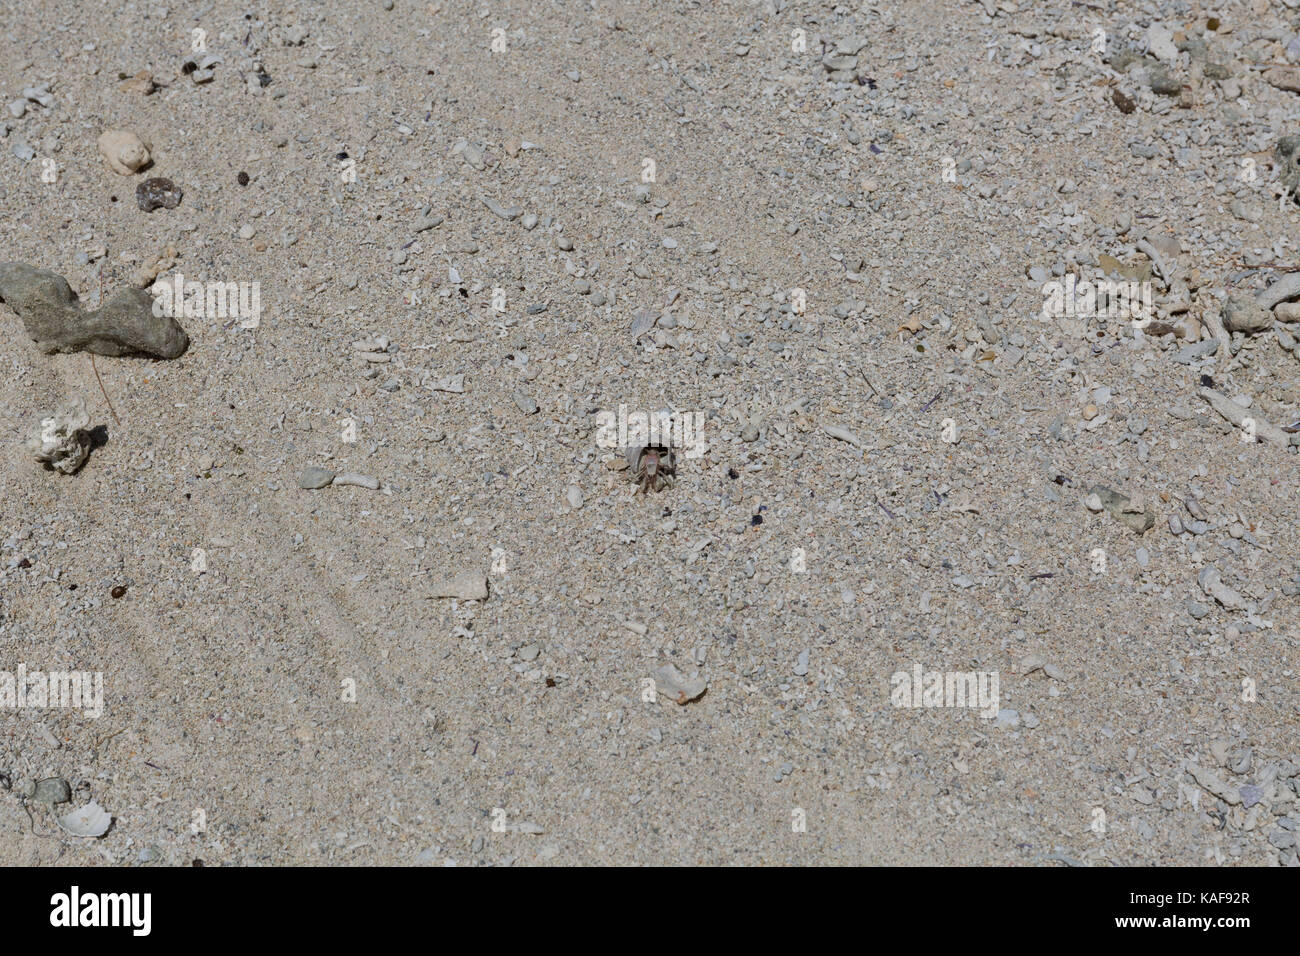 Hermit Crab on a beach in Mauritius Stock Photo